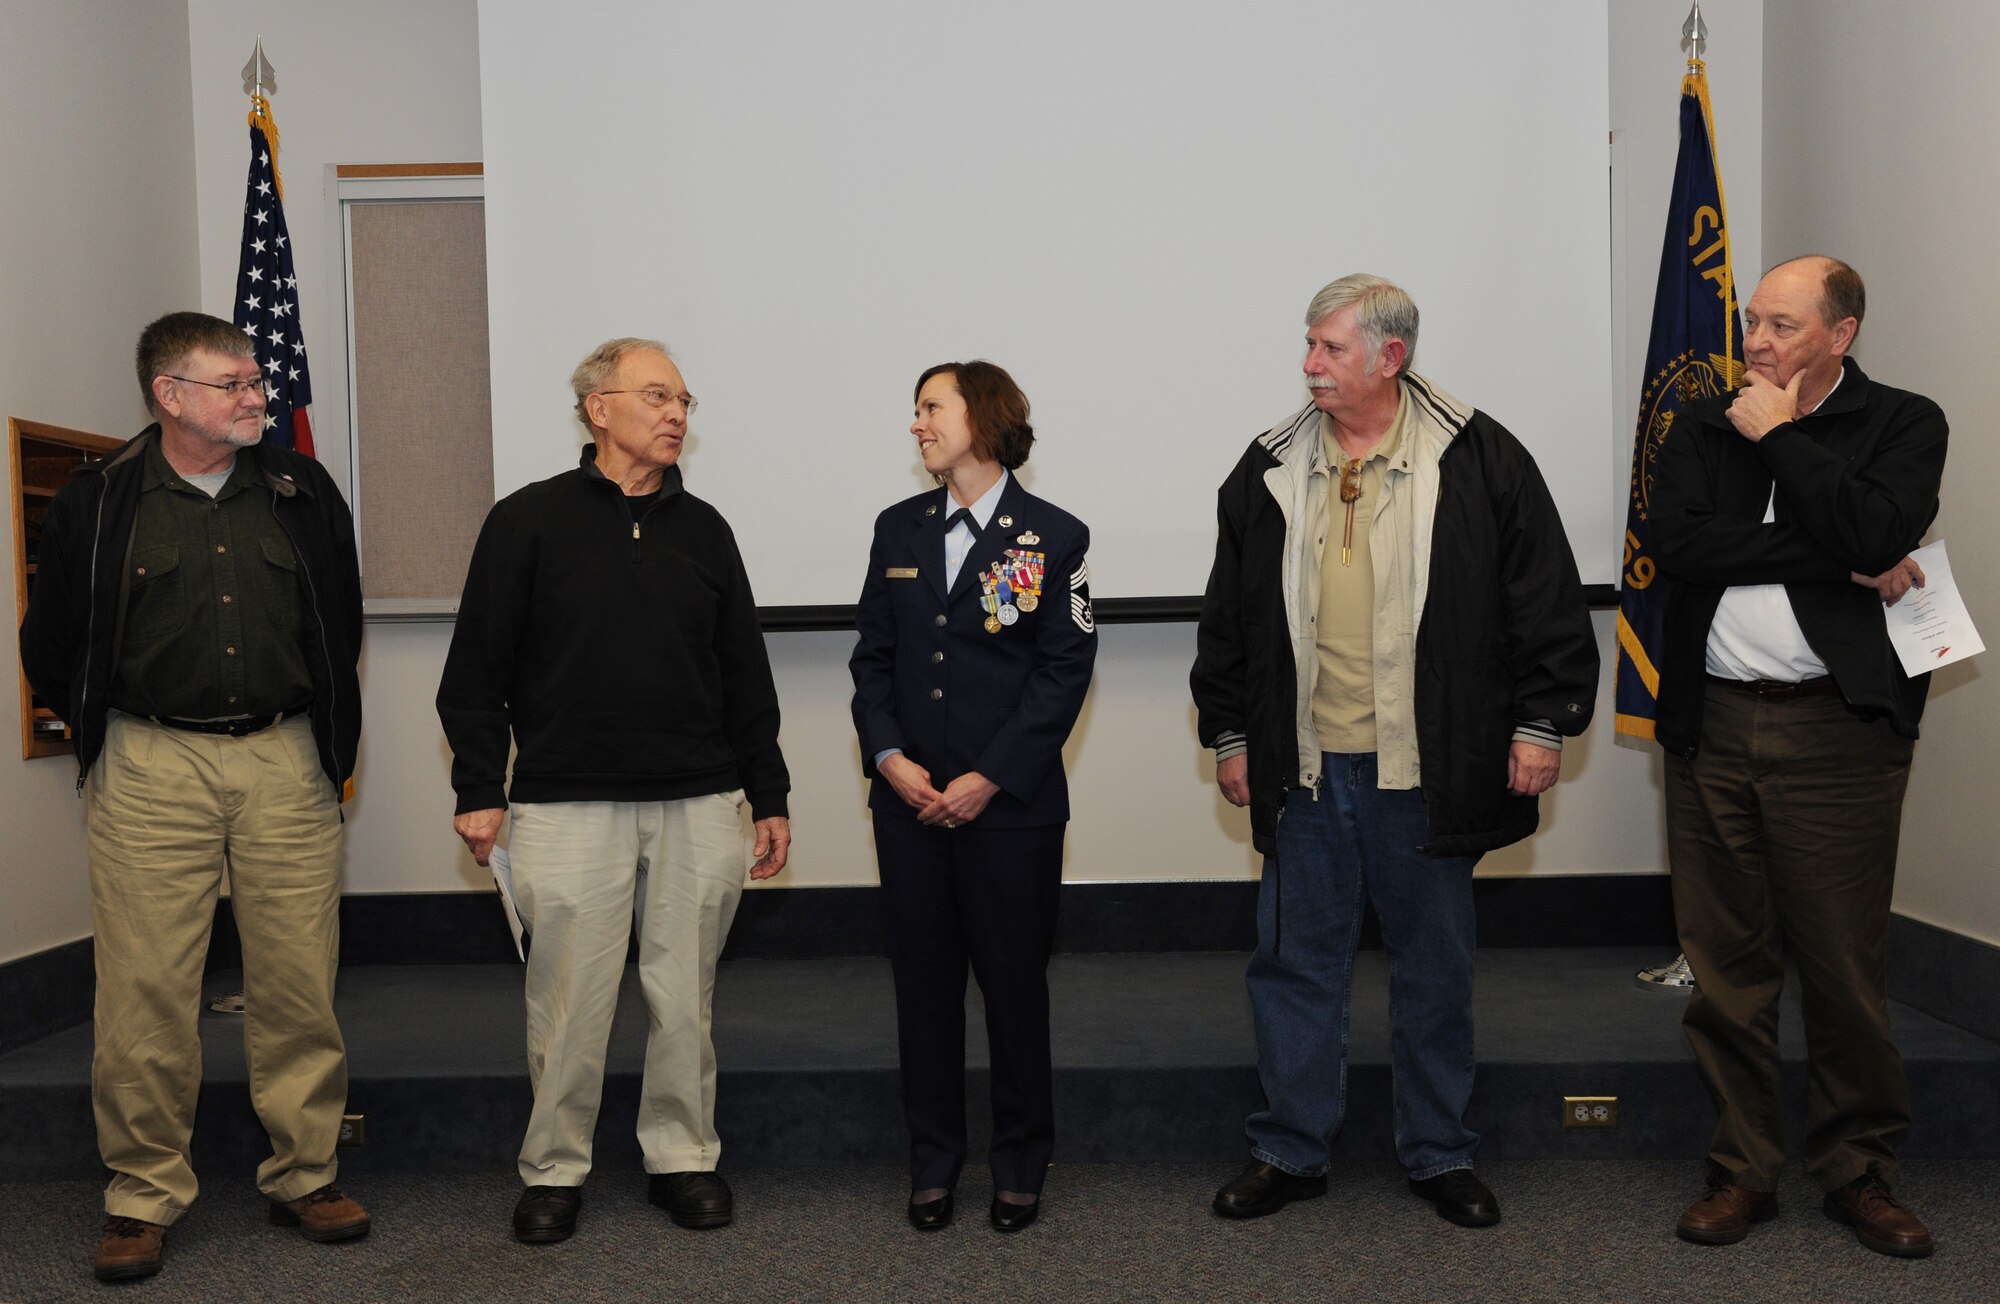 Four retired Oregon Air National Guard Chief Master Sergeants take turns highlighting Chief Master Sgt. Jean Allen, center, career in the Oregon Air National Guard, during her formal retirement ceremony, Dec. 22, 2015, Portland Air National Guard Base, Ore. (Air National Guard photo by Tech. Sgt. John Hughel, 142nd Fighter Wing Public Affairs)